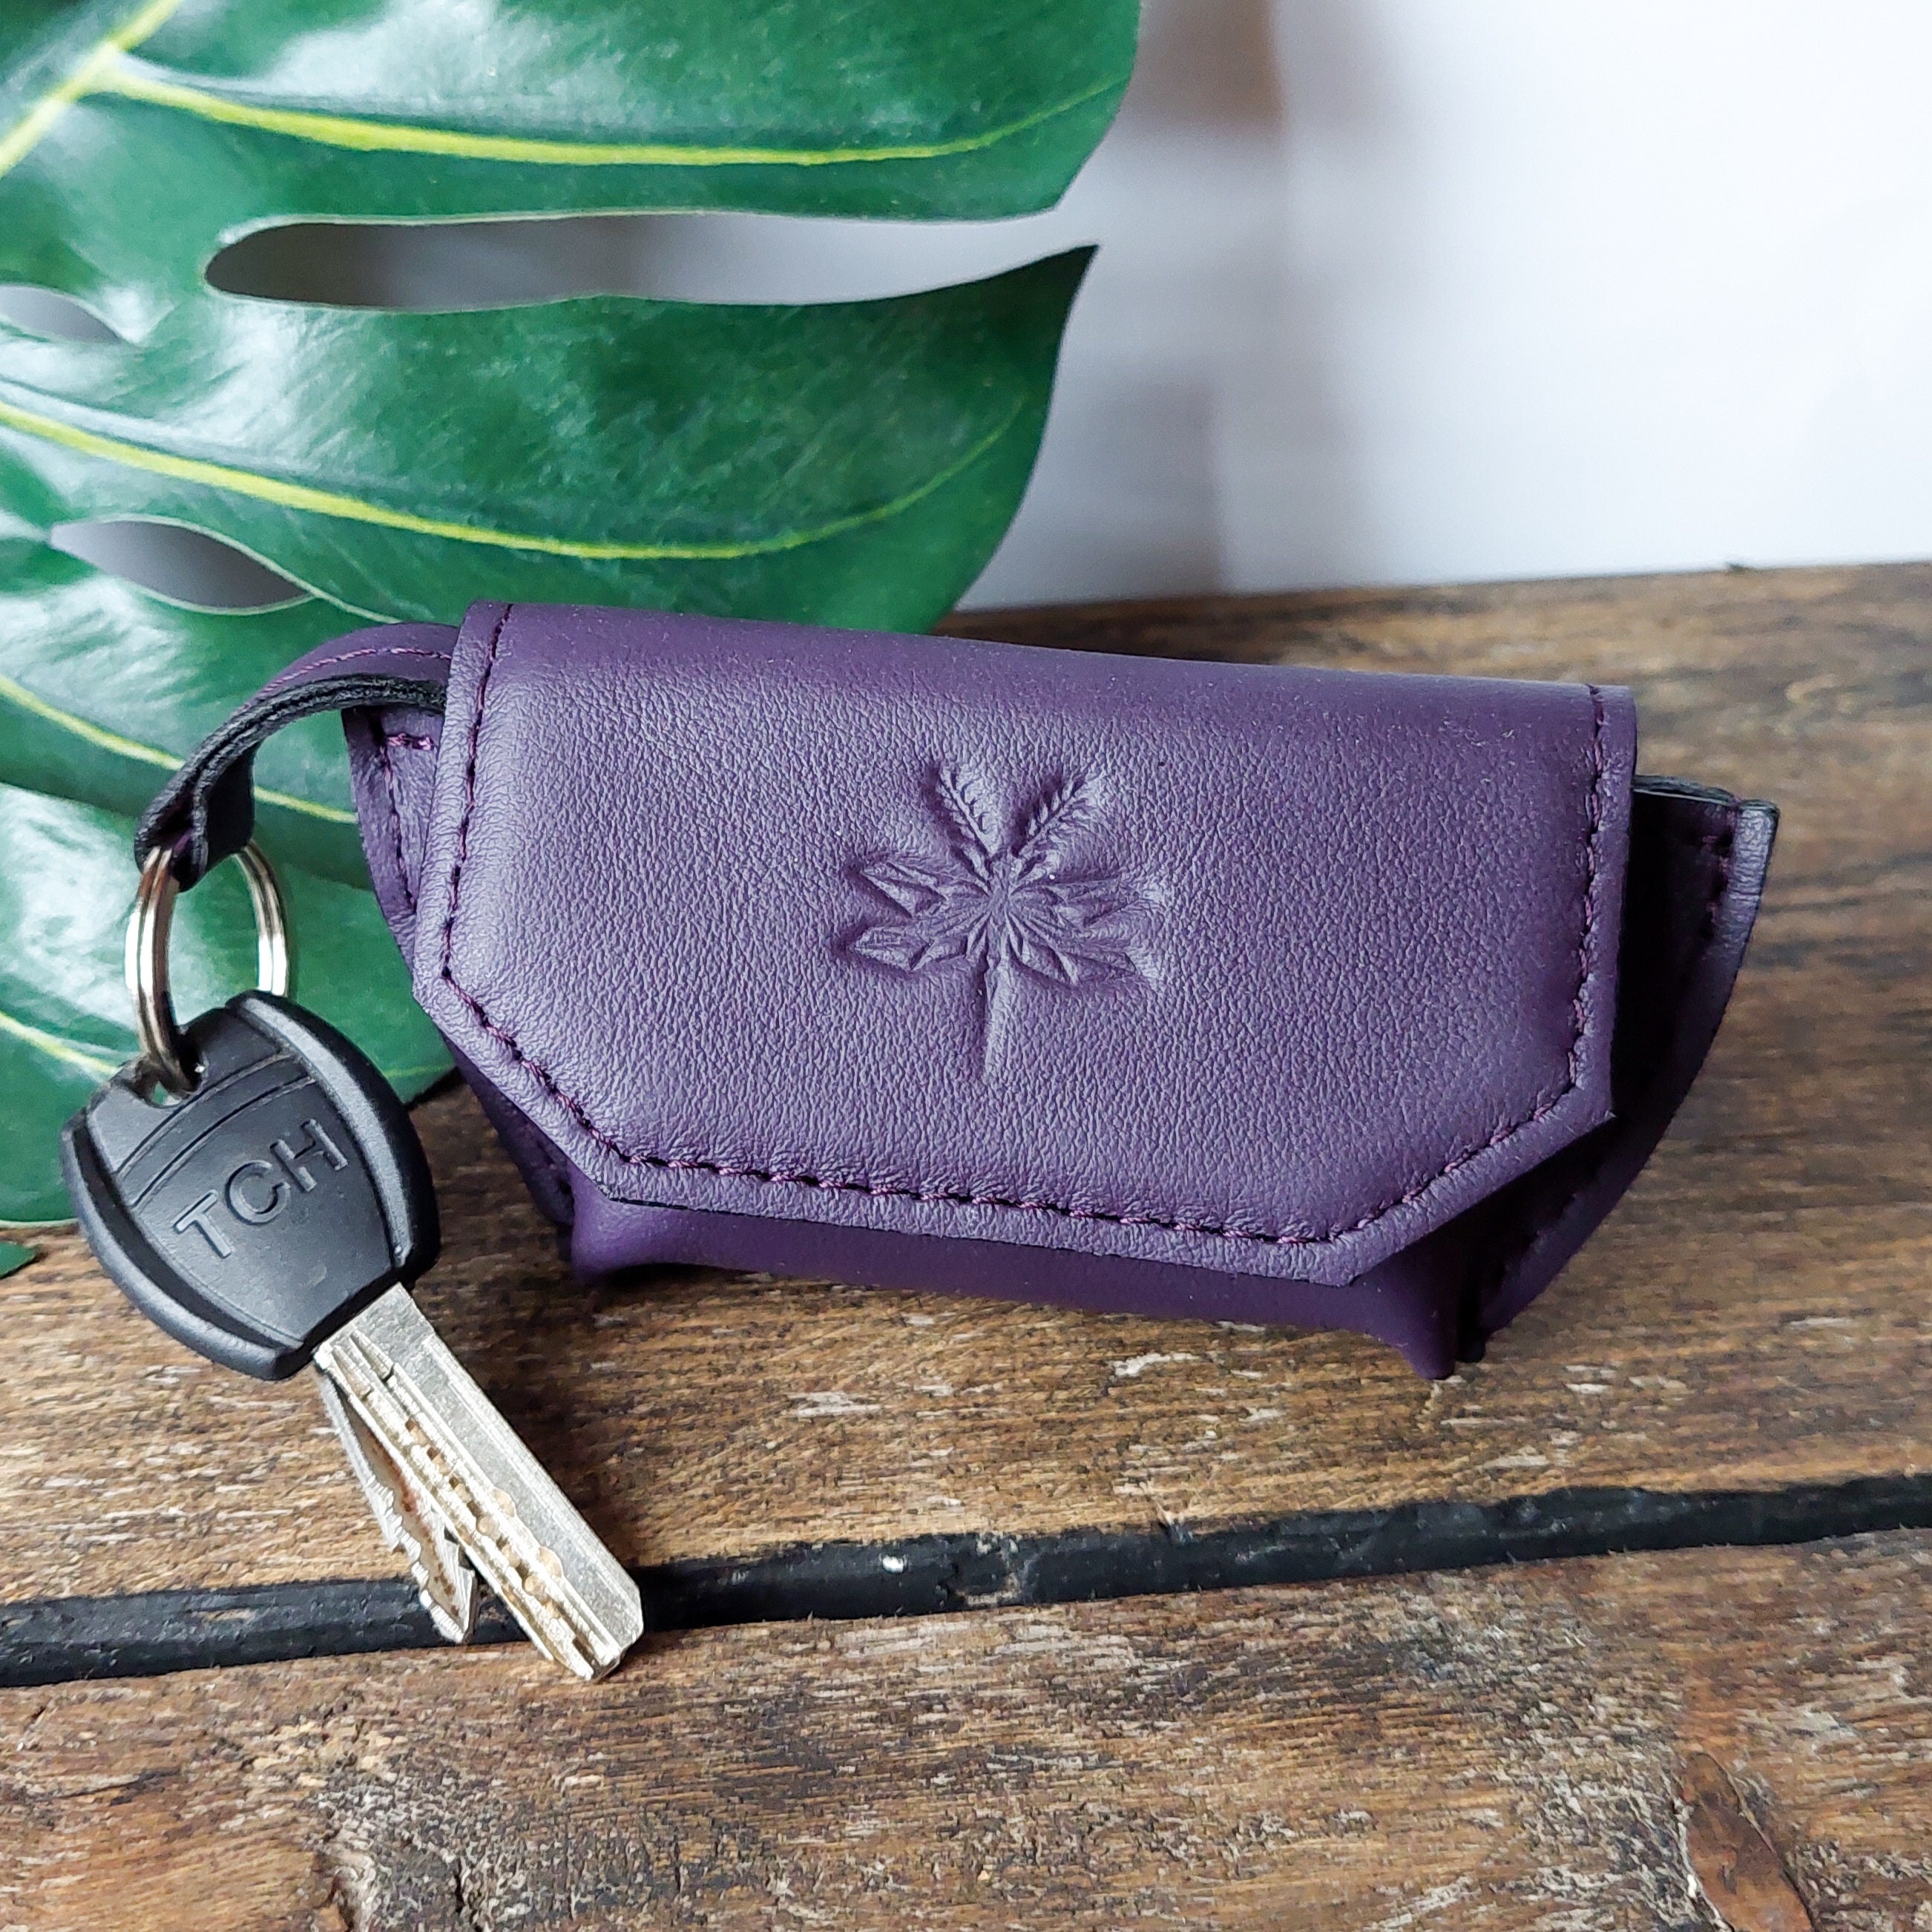 Unisex Keychain Leather Key Chain Key Pouch Leather Wallet 